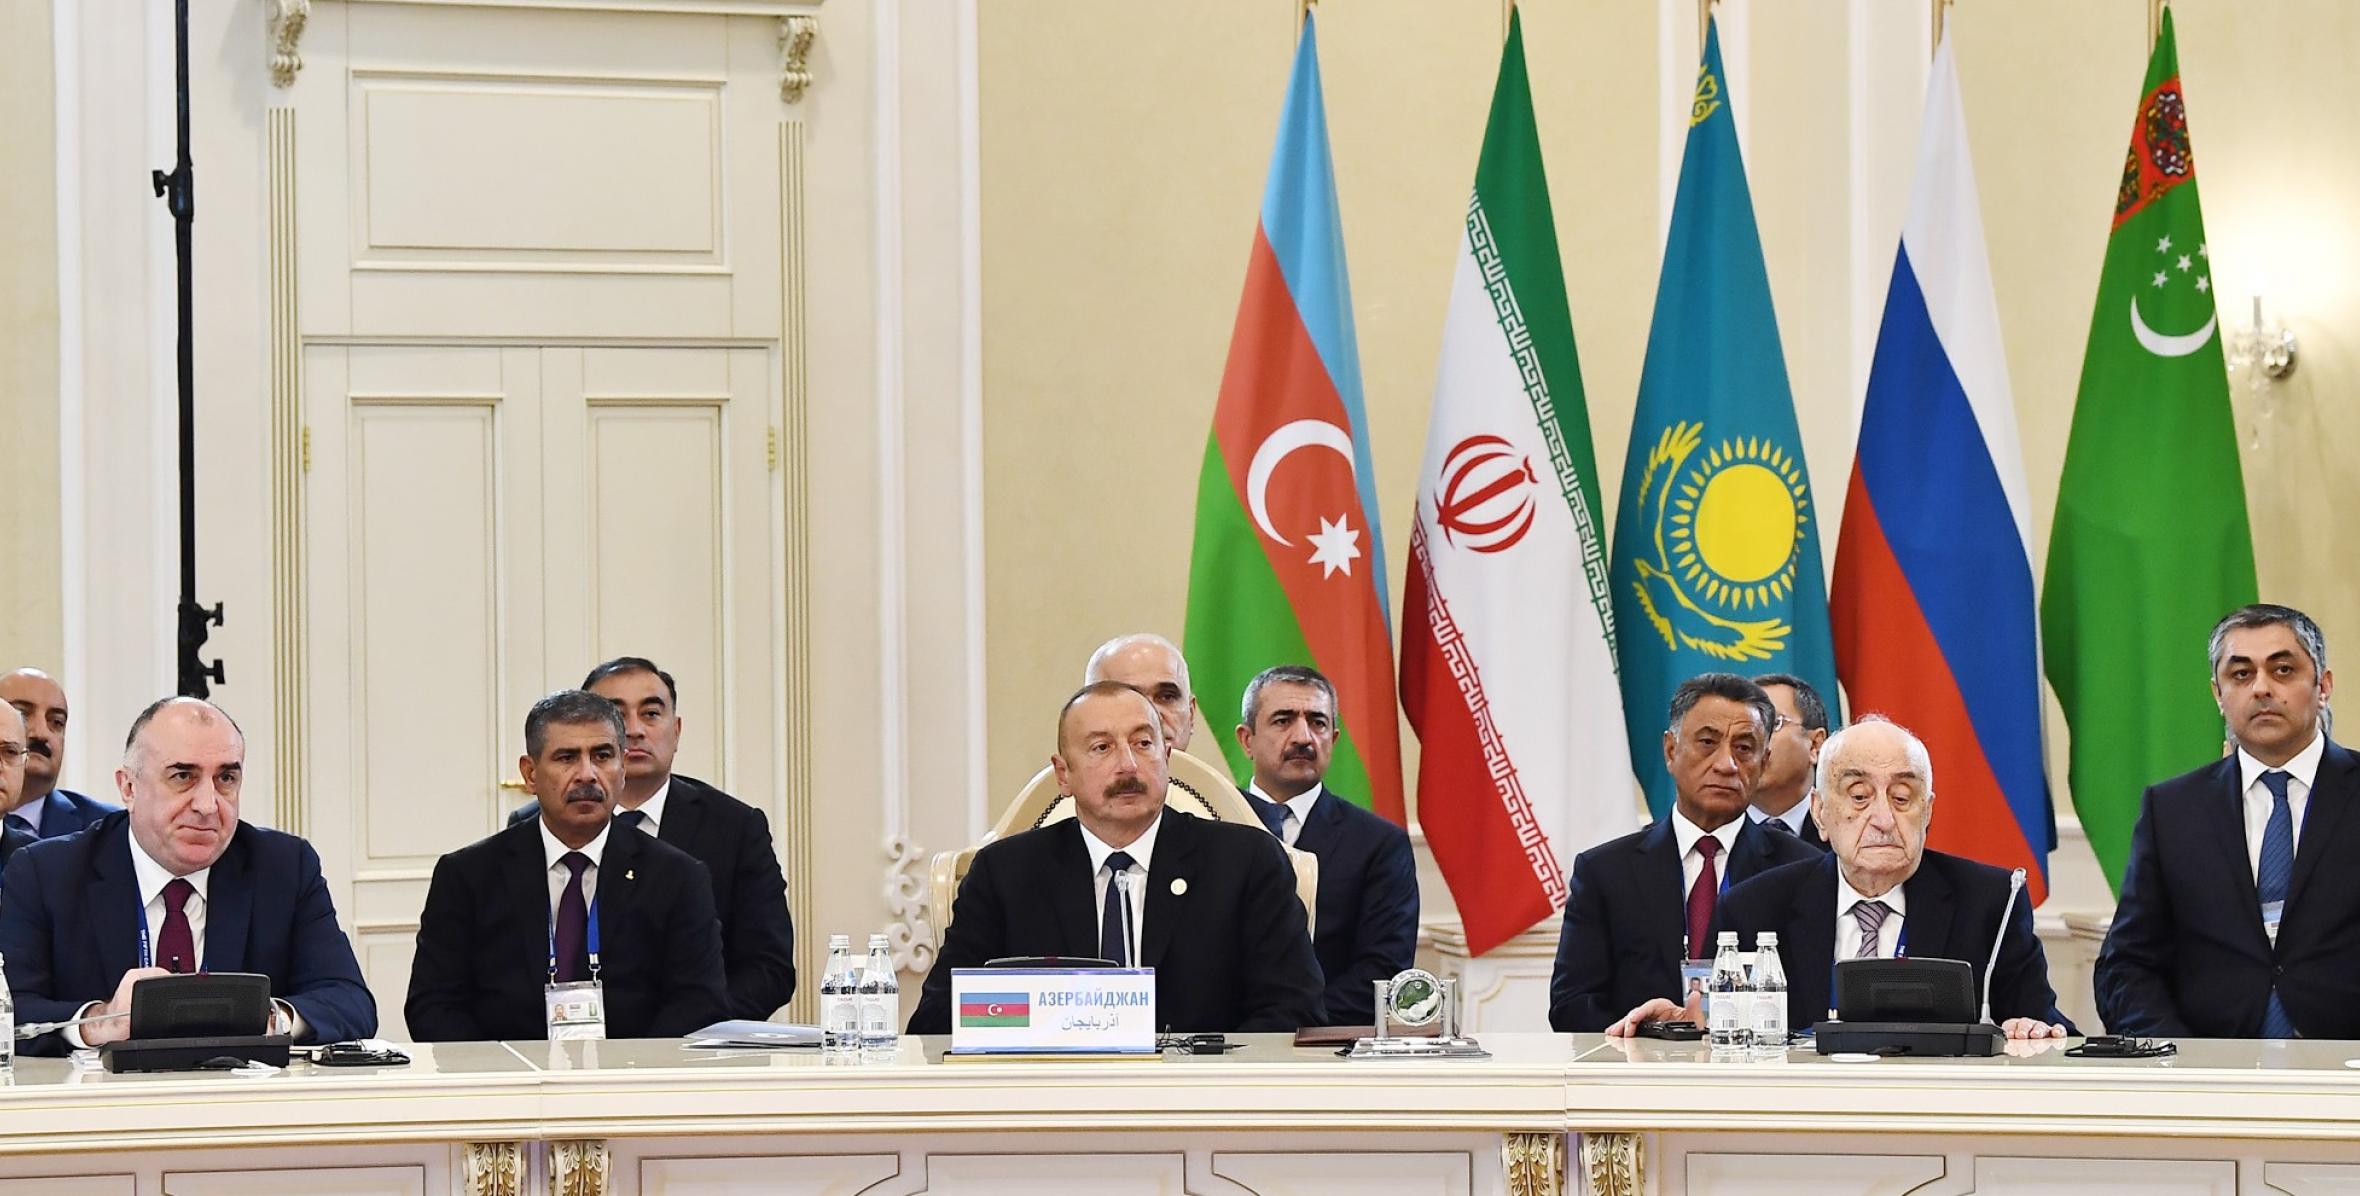 Ilham Aliyev attended the 5th Summit of Heads of State of Caspian littoral states